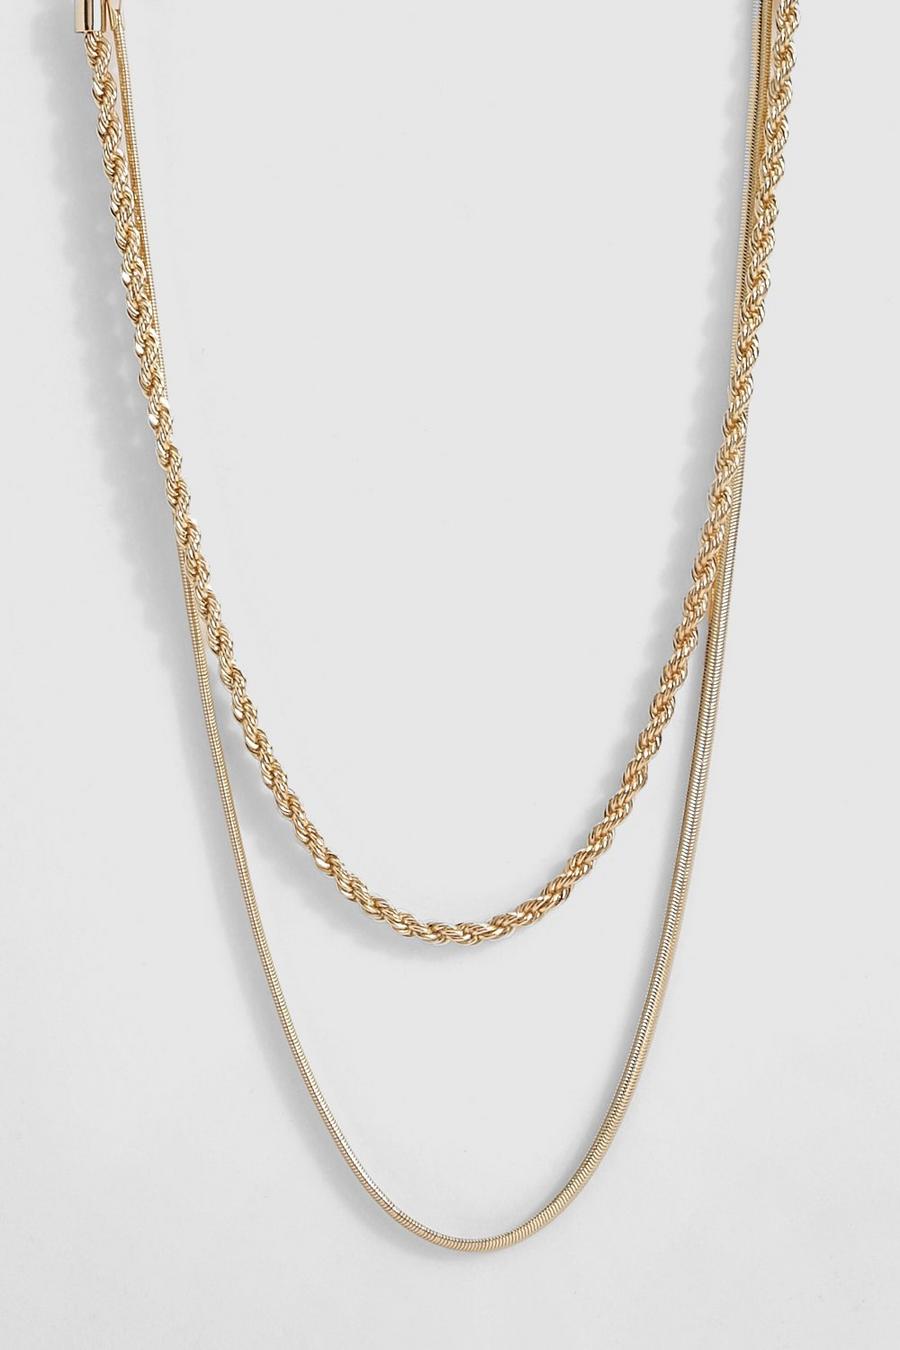 Gold Double Chain Rope Necklace